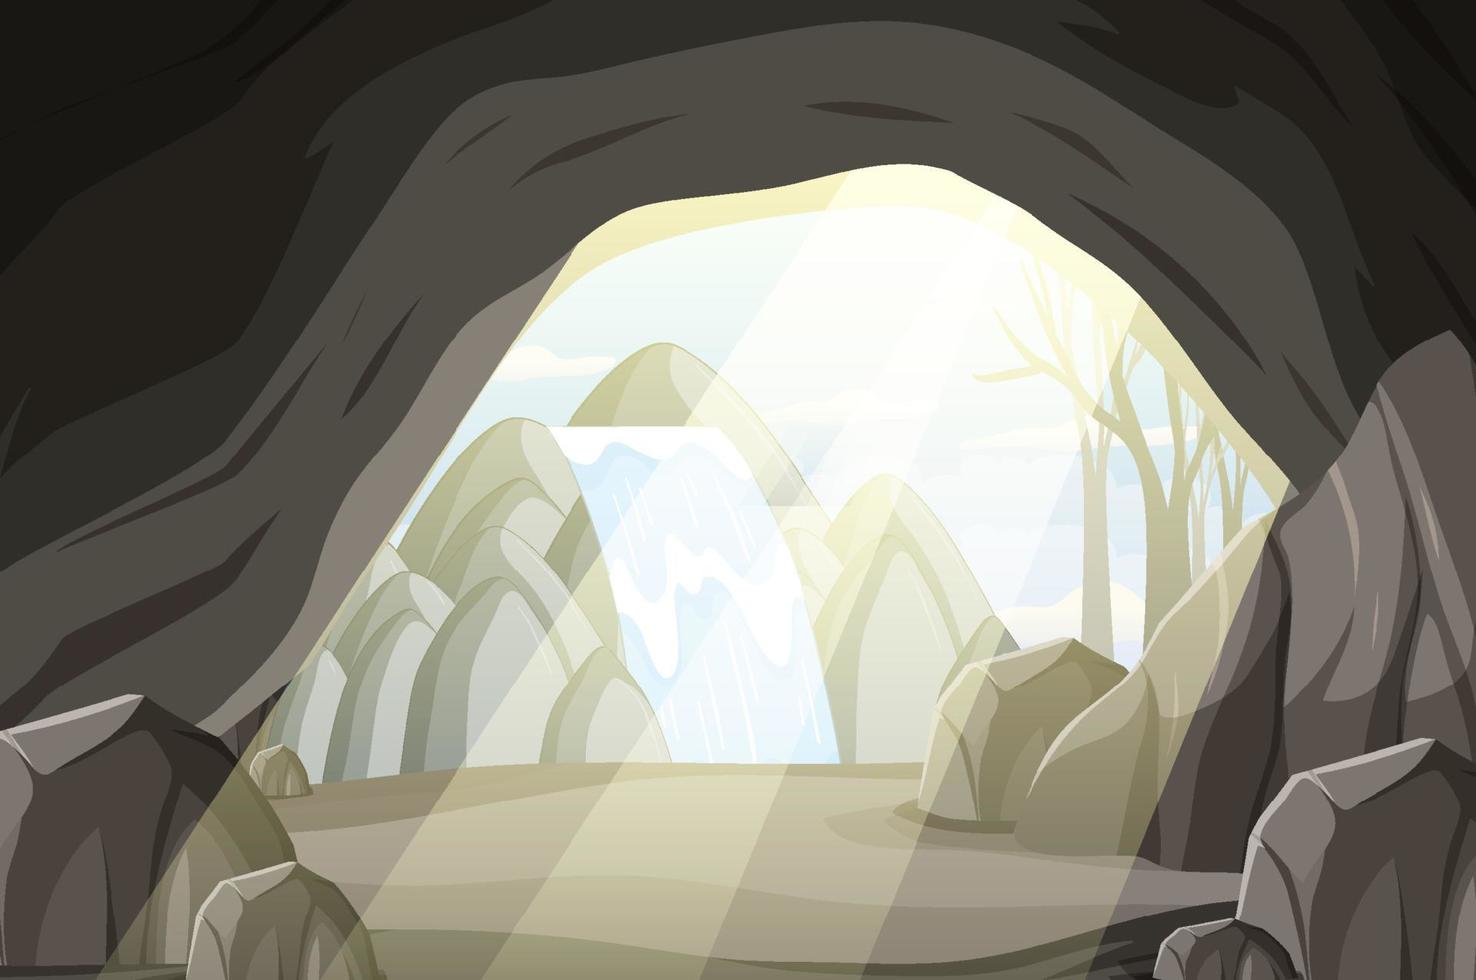 Inside cave landscape in cartoon style vector